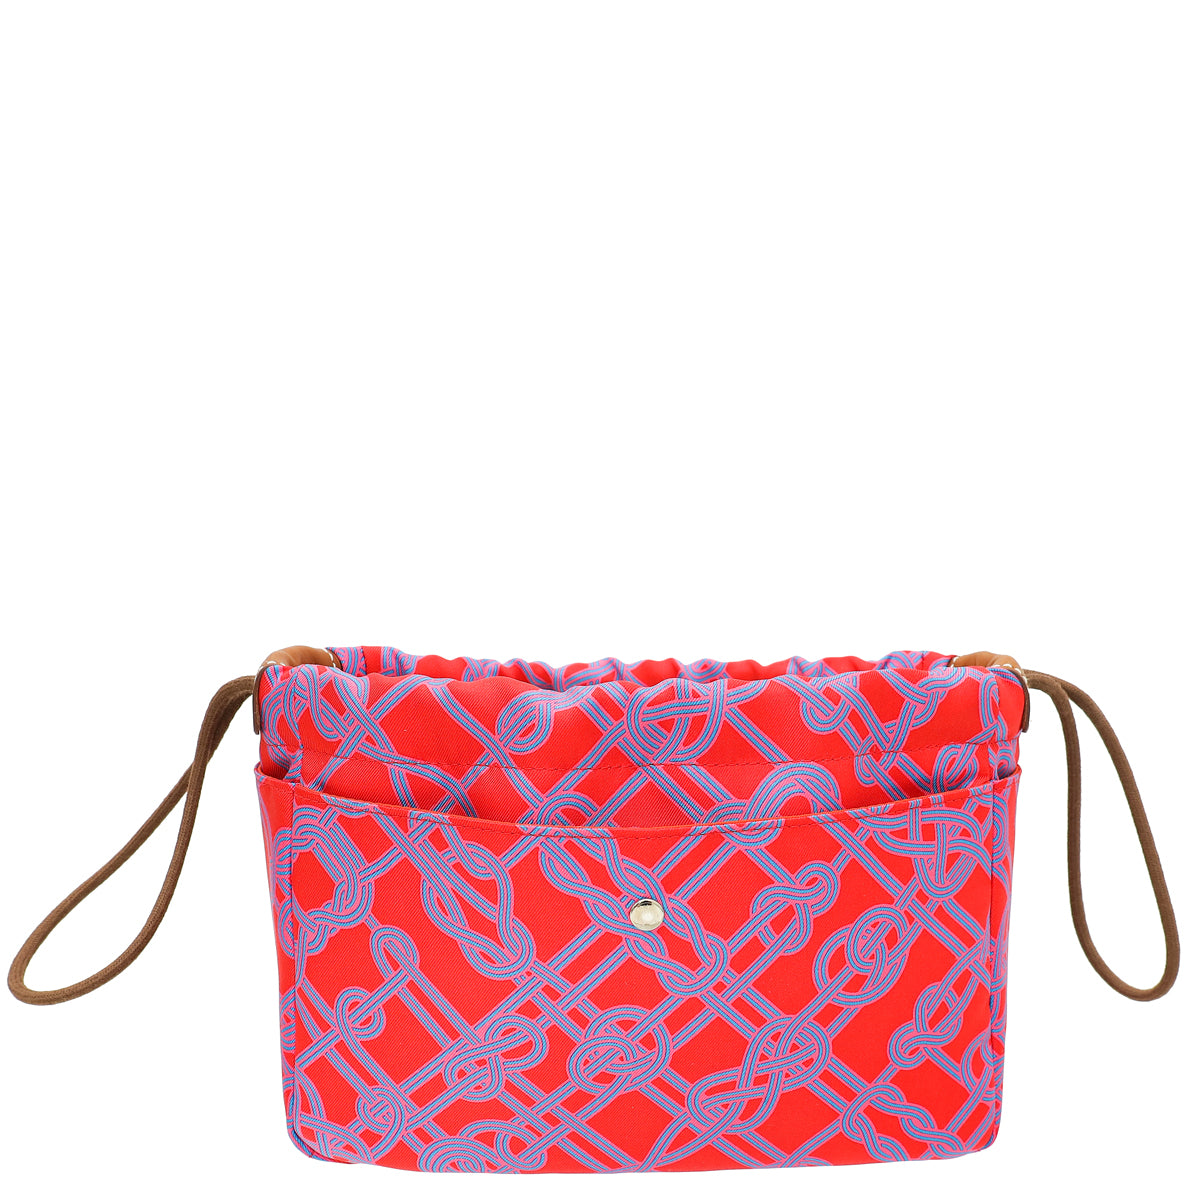 Hermes Bicolor Fourbi 20 "Noeud Marin" Print Pouch